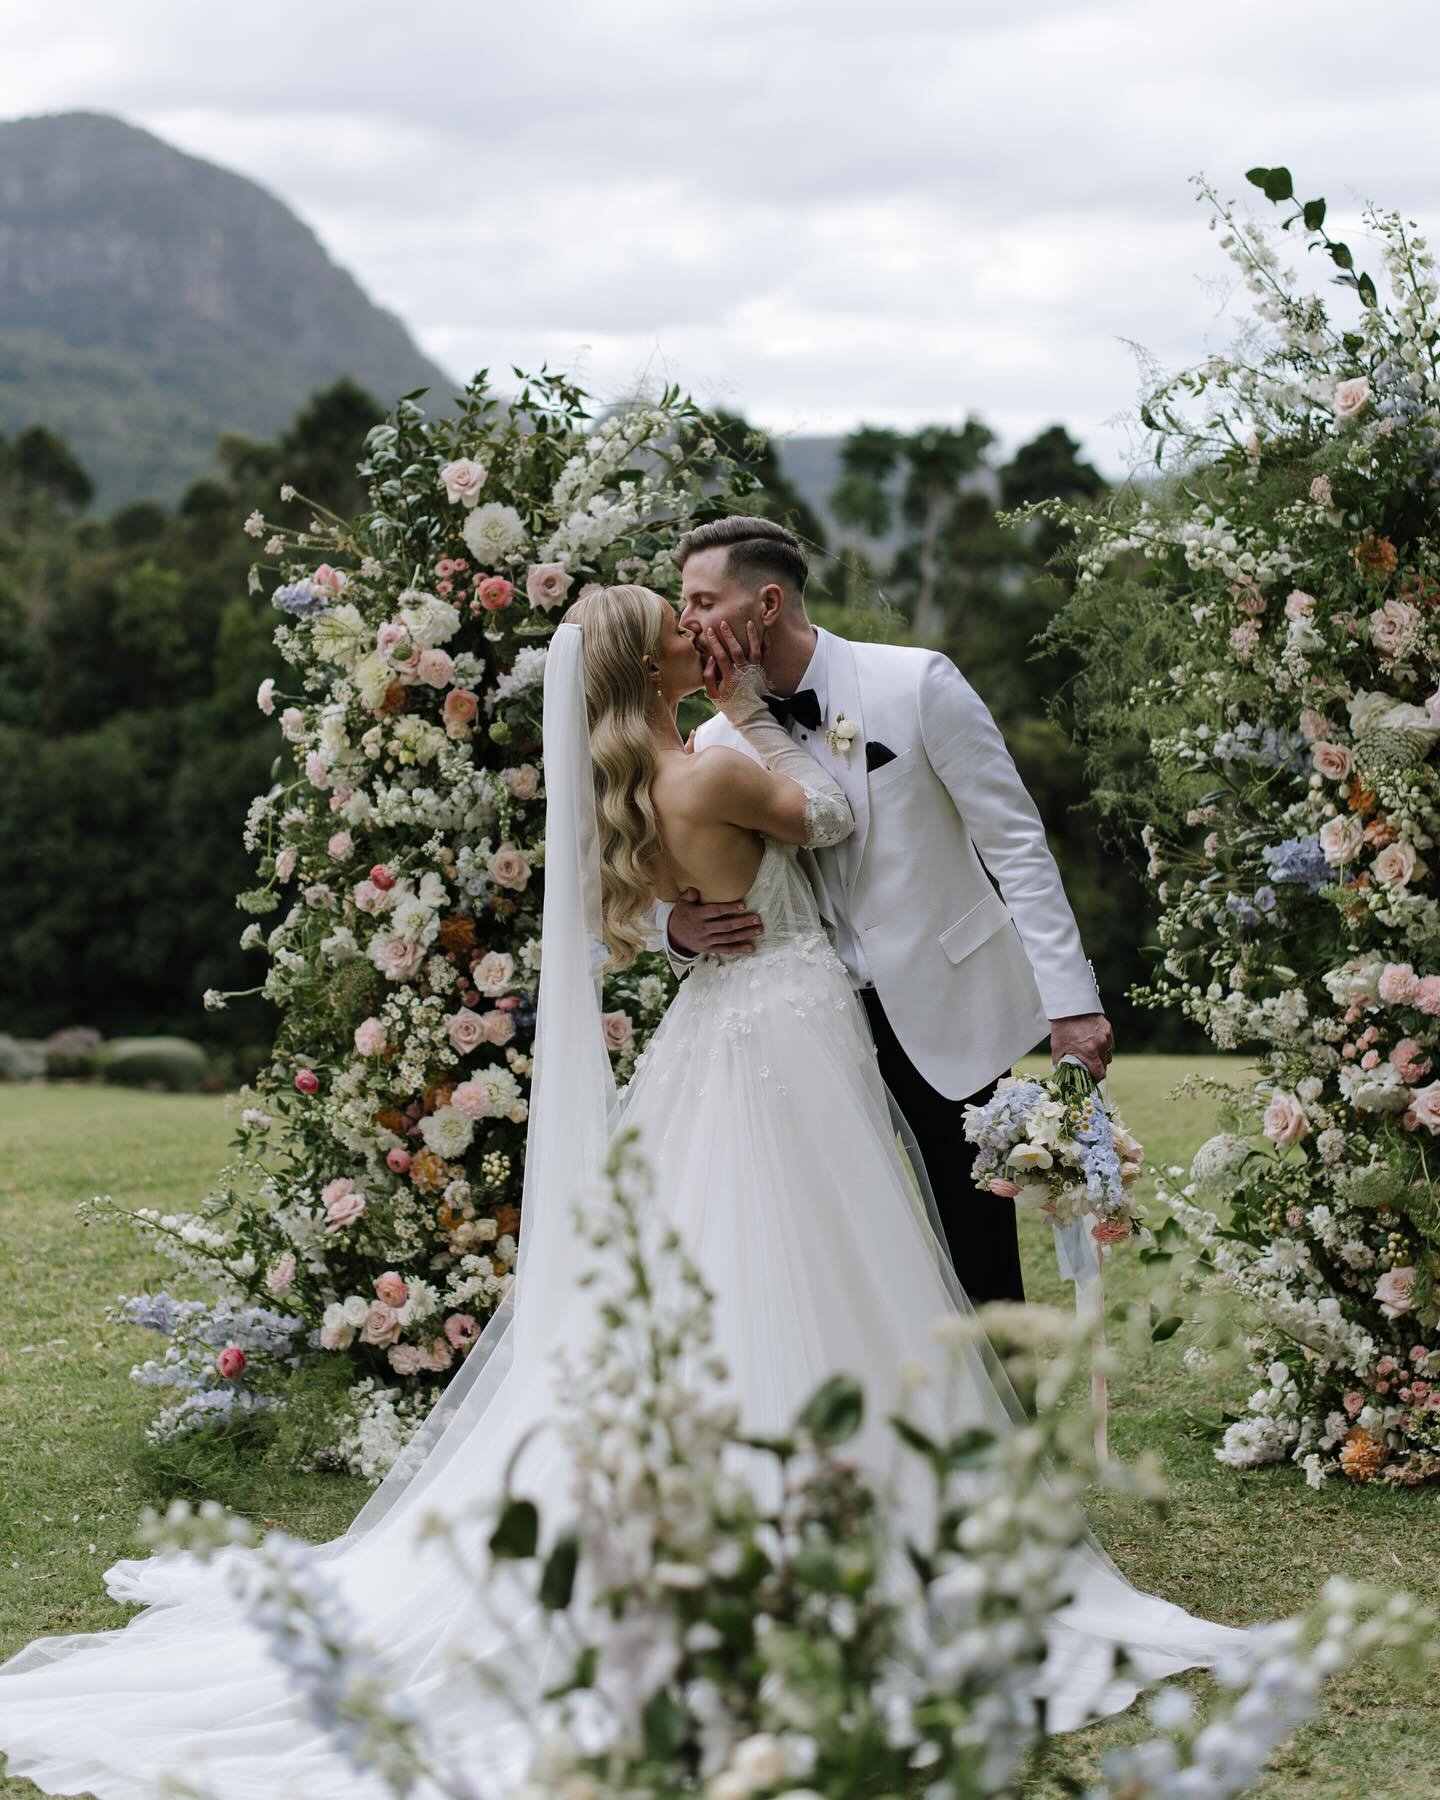 The dreamiest kind of gown for Victoria, makes you feel like you&rsquo;re transported to a flower filled meadow! Heaven for a Saturday morning don&rsquo;t you agree? 
.
🌸🌼🌷
.
 Photos by @leahcruikshank
Flowers @maddiejaydee 
@vjdojcinovic